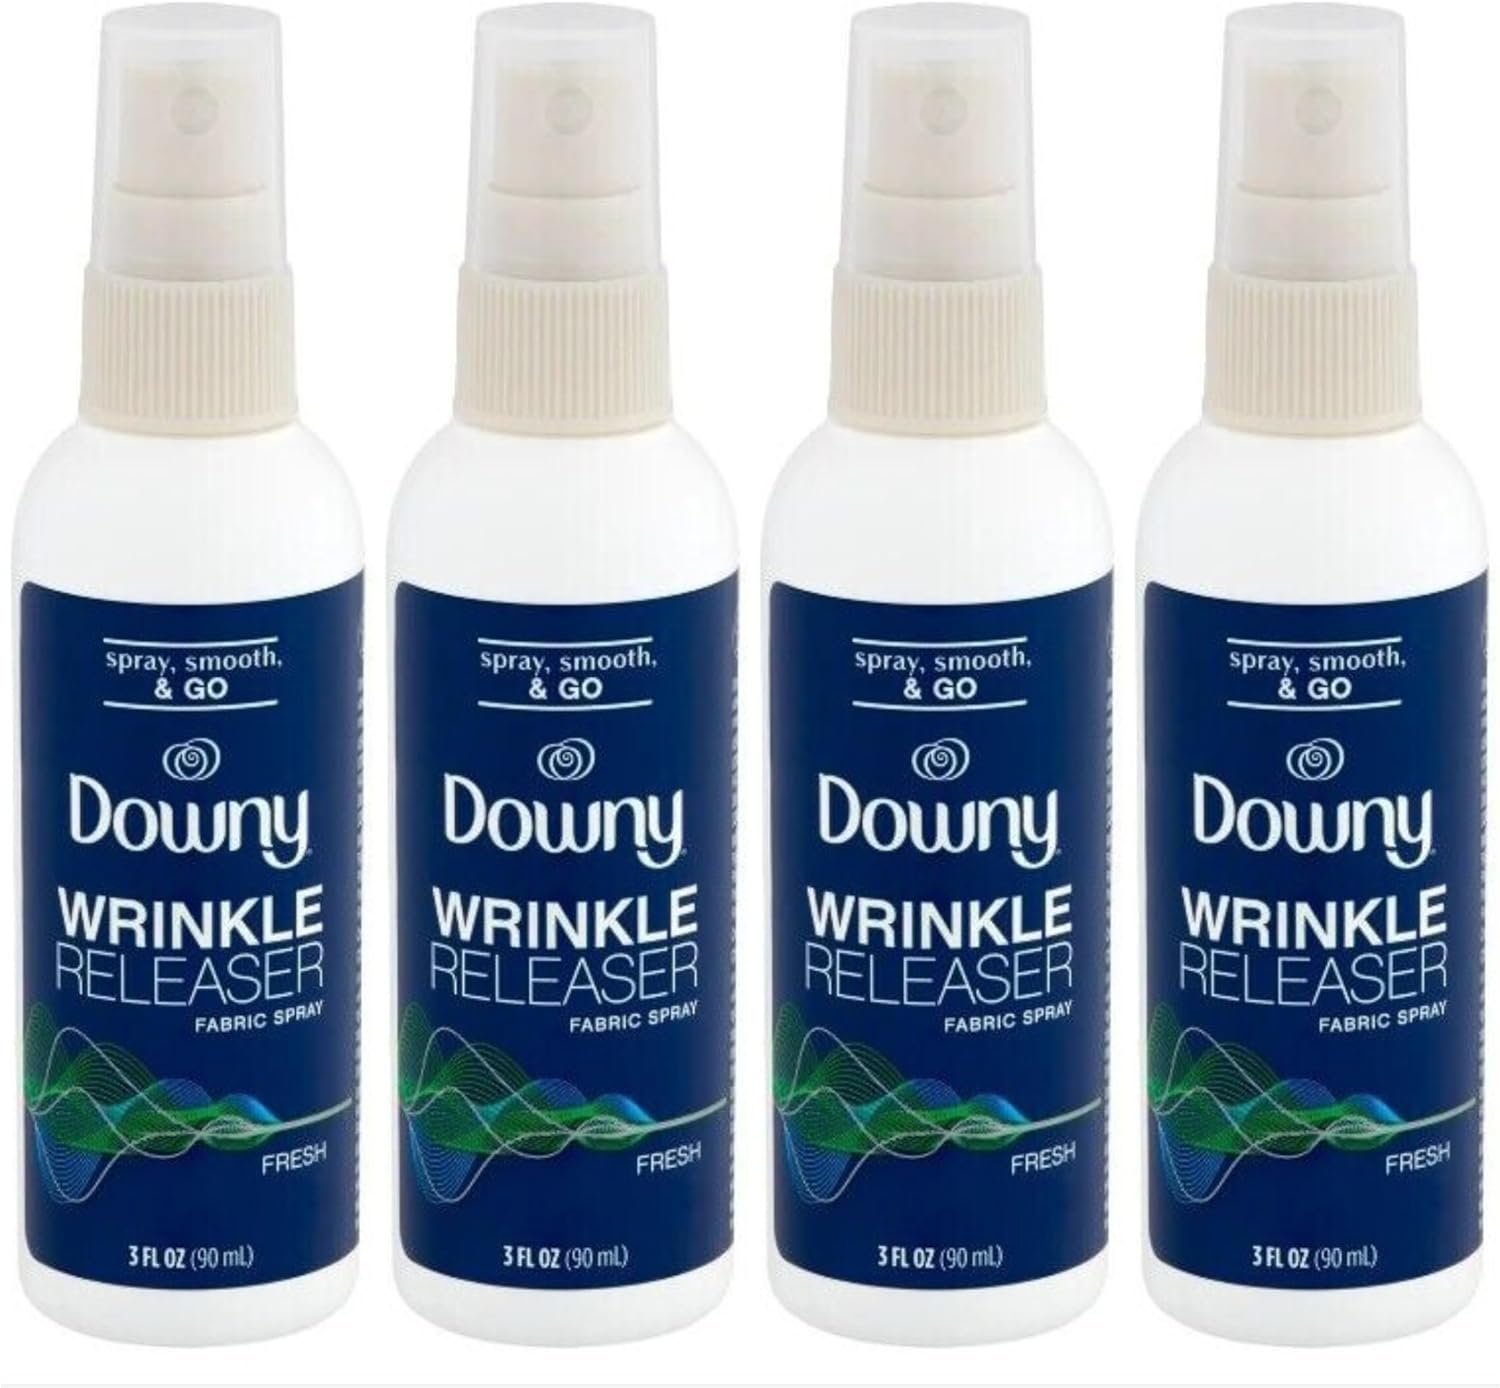 Bundle of Downy Wrinkle Releaser, 3oz Travel Size, Light Fresh Scent (4 Pack-Packaging May Vary) by Downy with Convenient Magnetic Shopping List by Harper & Ivy Designs : Health & Household